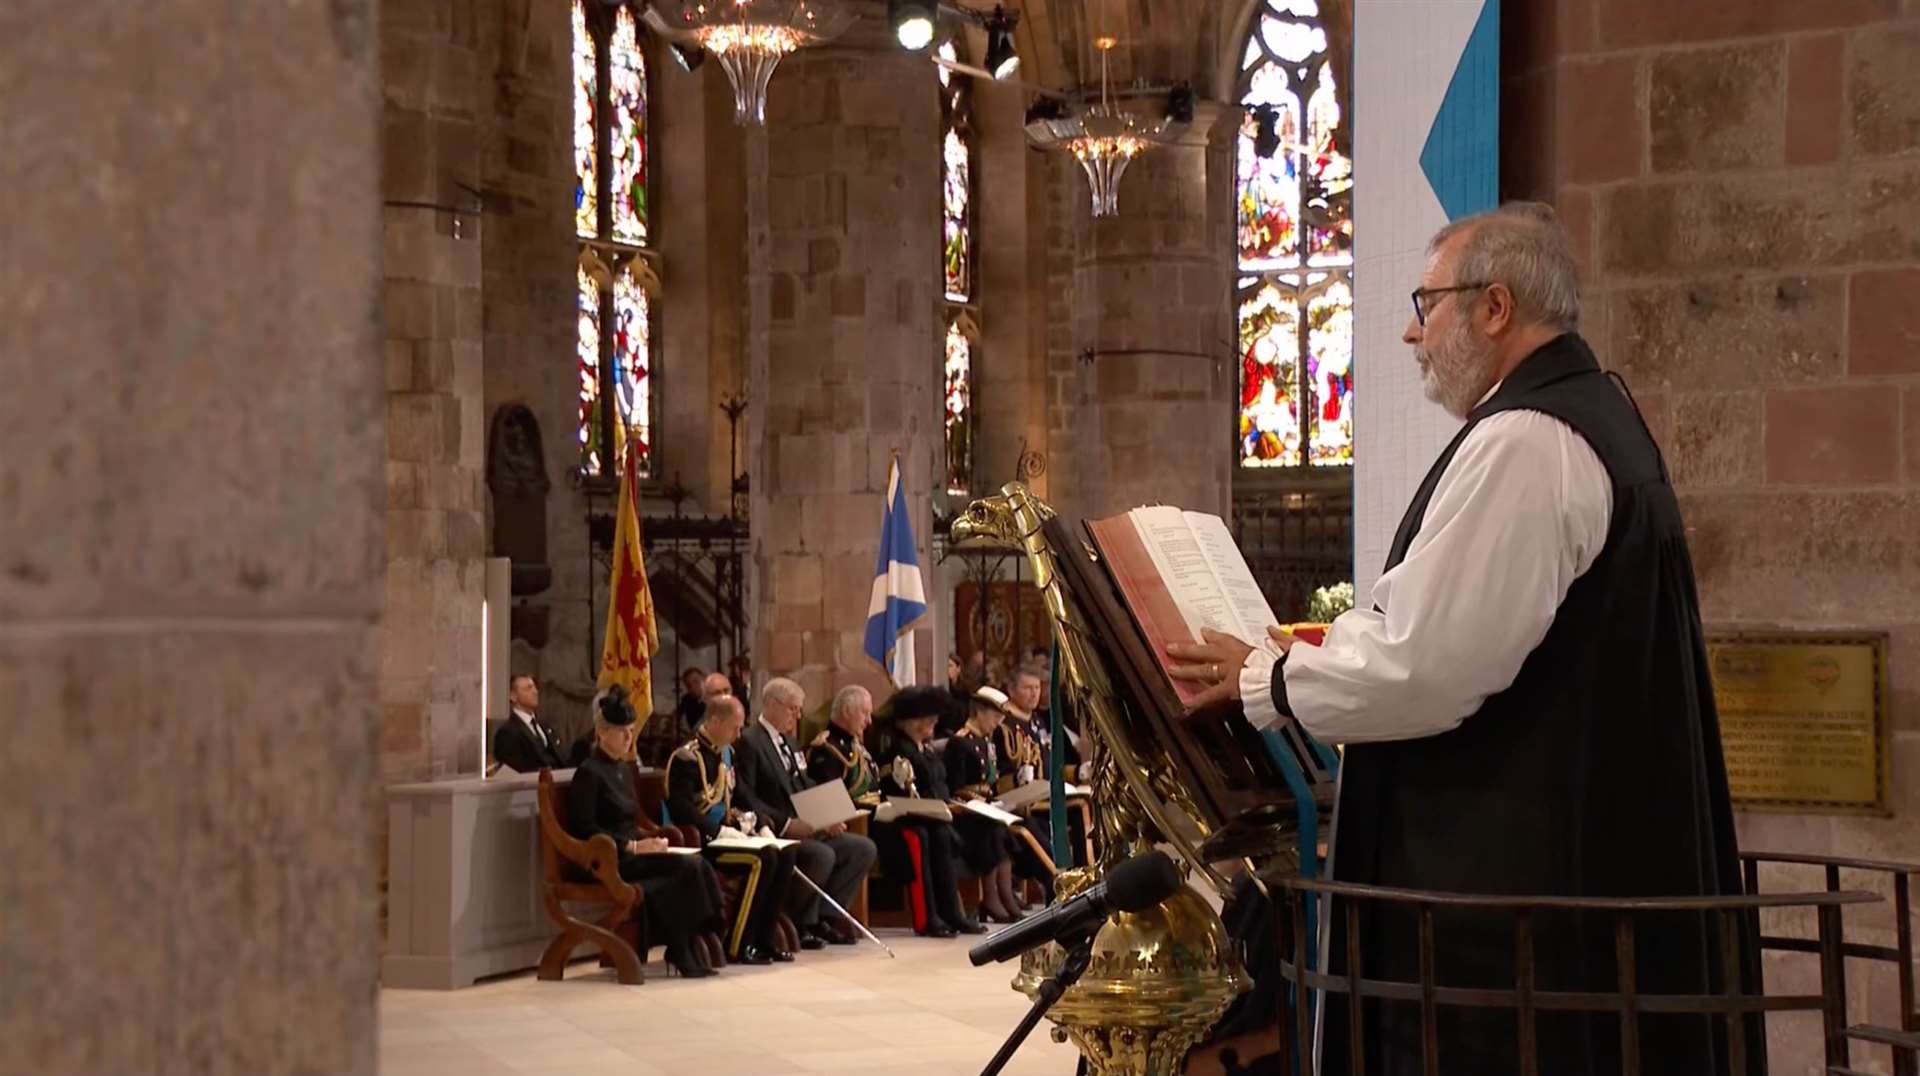 Bishop Mark Strange at the service of thanksgiving for the life of the Queen at St Giles' Cathedral in Edinburgh.